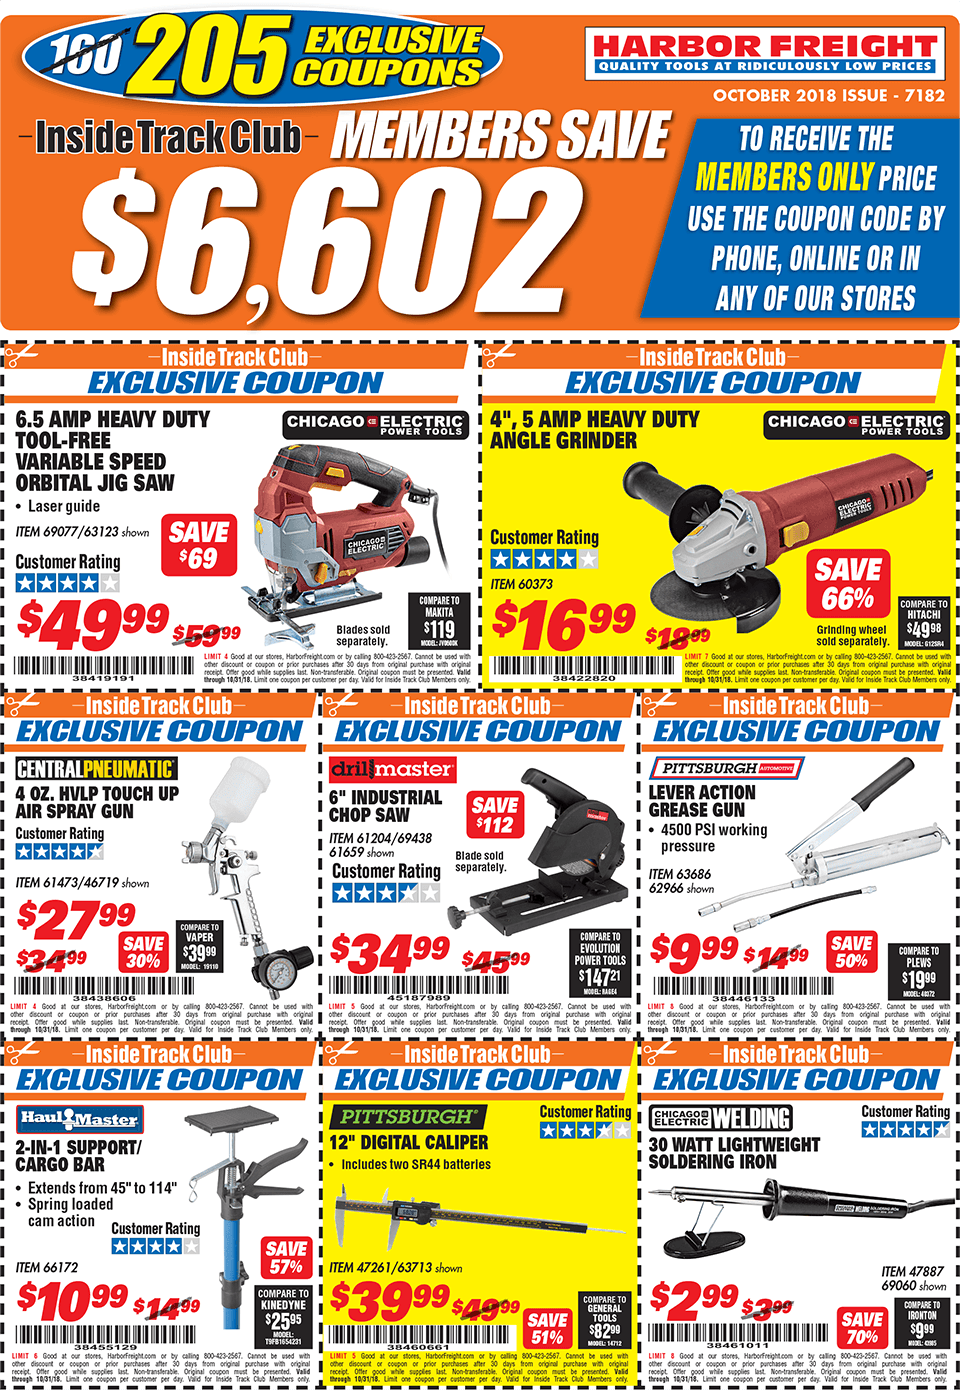 Harbor Freight Coupon Thread Page 803 Slickdeals Net